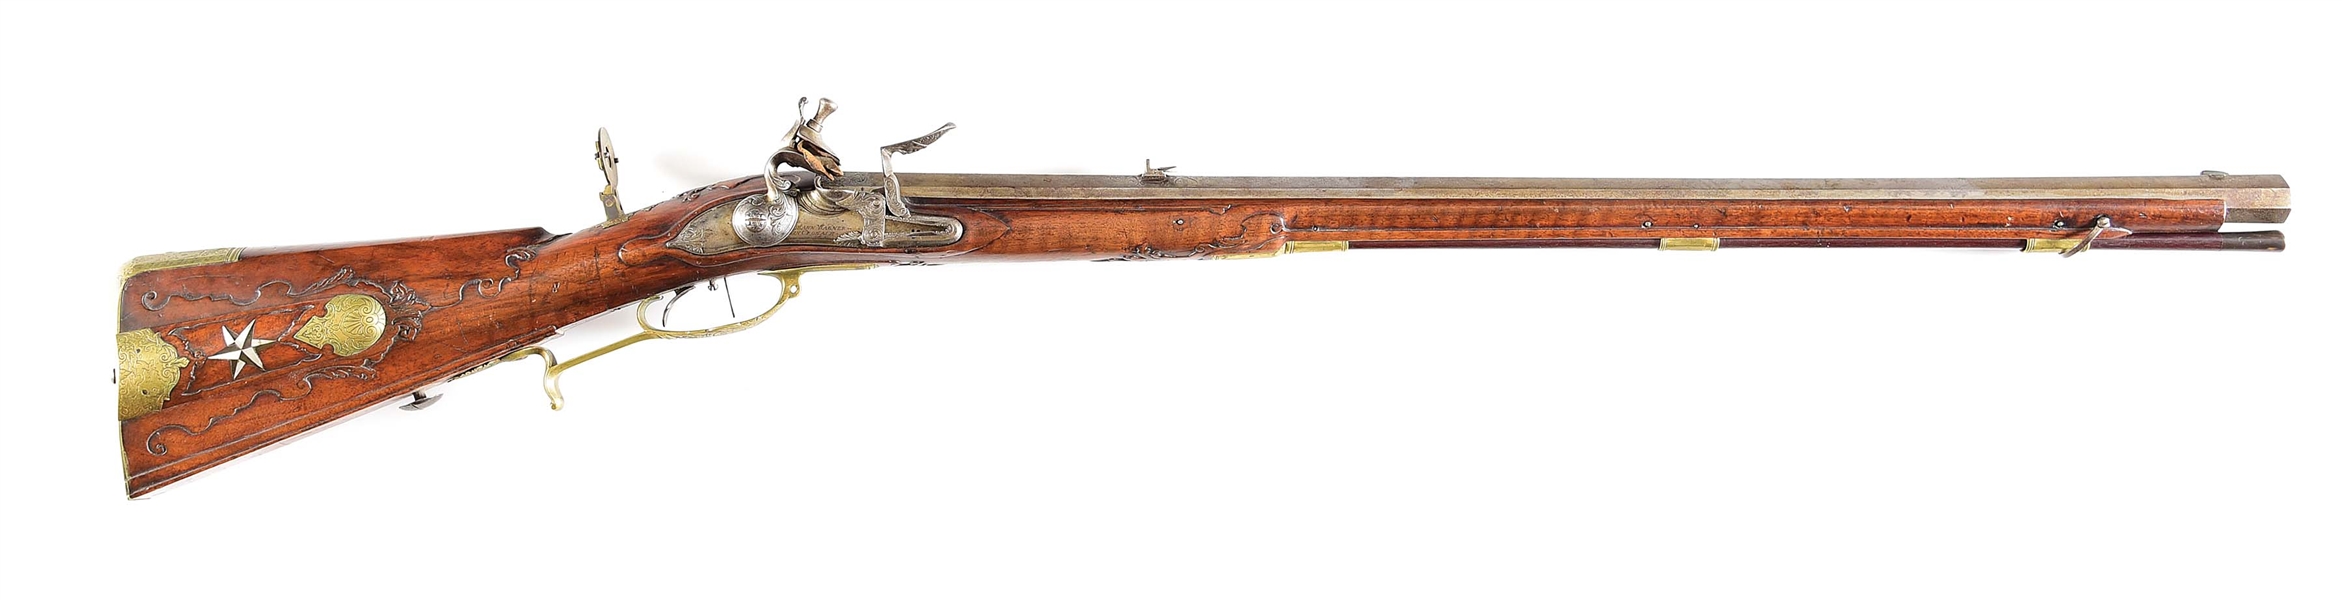 (A) A SCARCE JOHANN WAGNER FLINTLOCK JAEGER RIFLE, WITH A VERY LATE 1744 DATE, ORTHOPTIC SIGHT, AND IMPRESSIVE CARVING ON BOTH METAL AND WOOD.